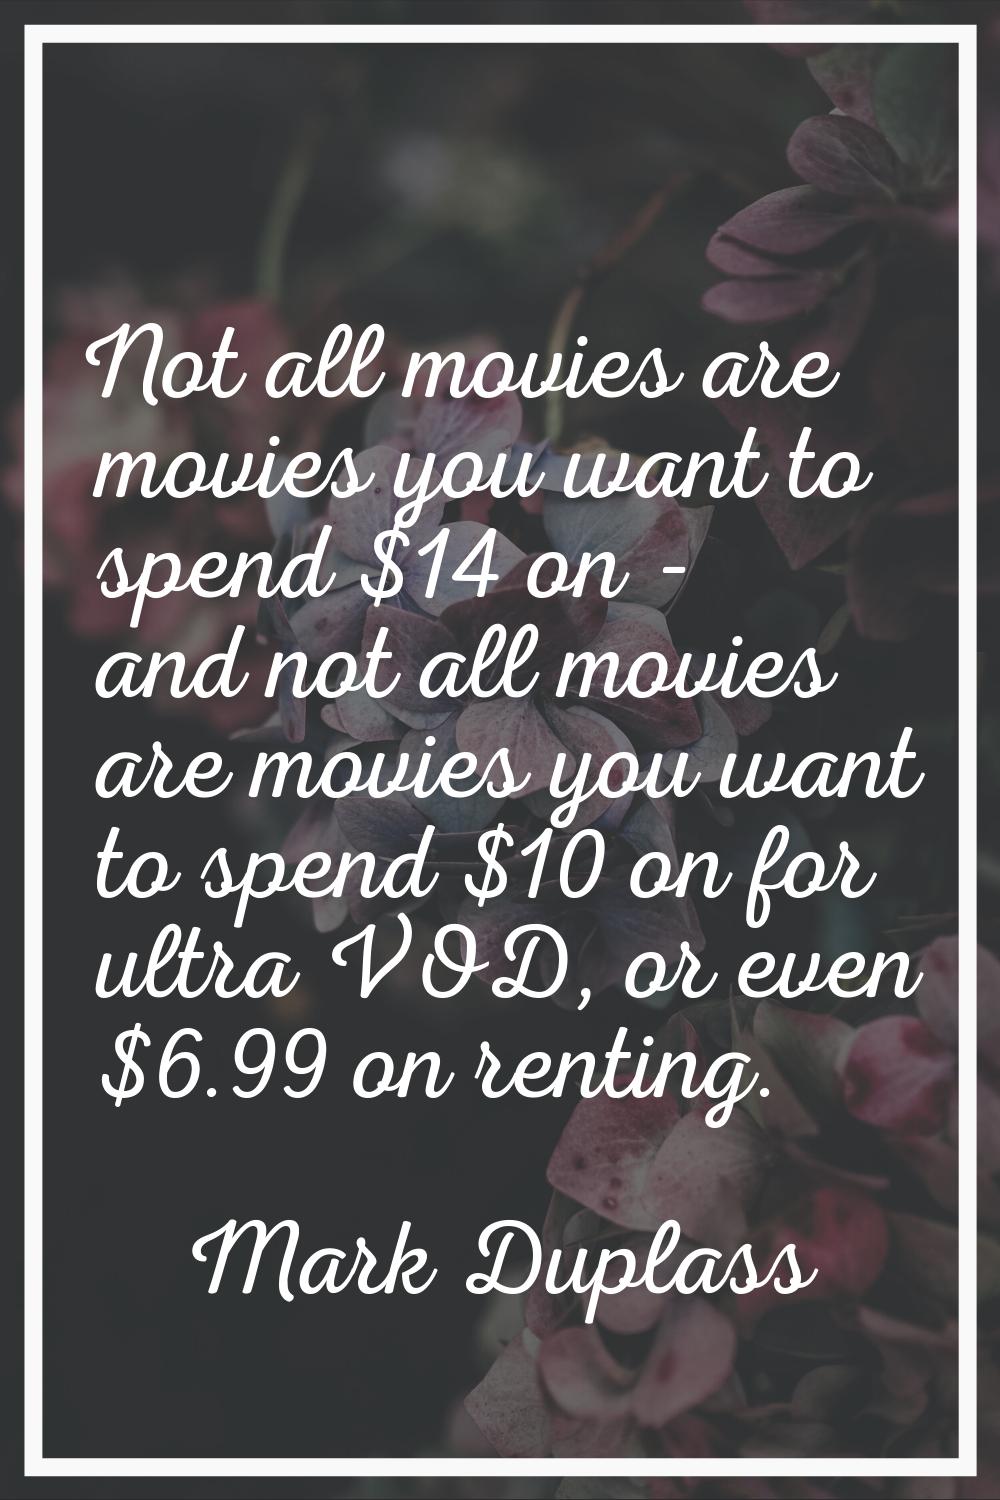 Not all movies are movies you want to spend $14 on - and not all movies are movies you want to spen